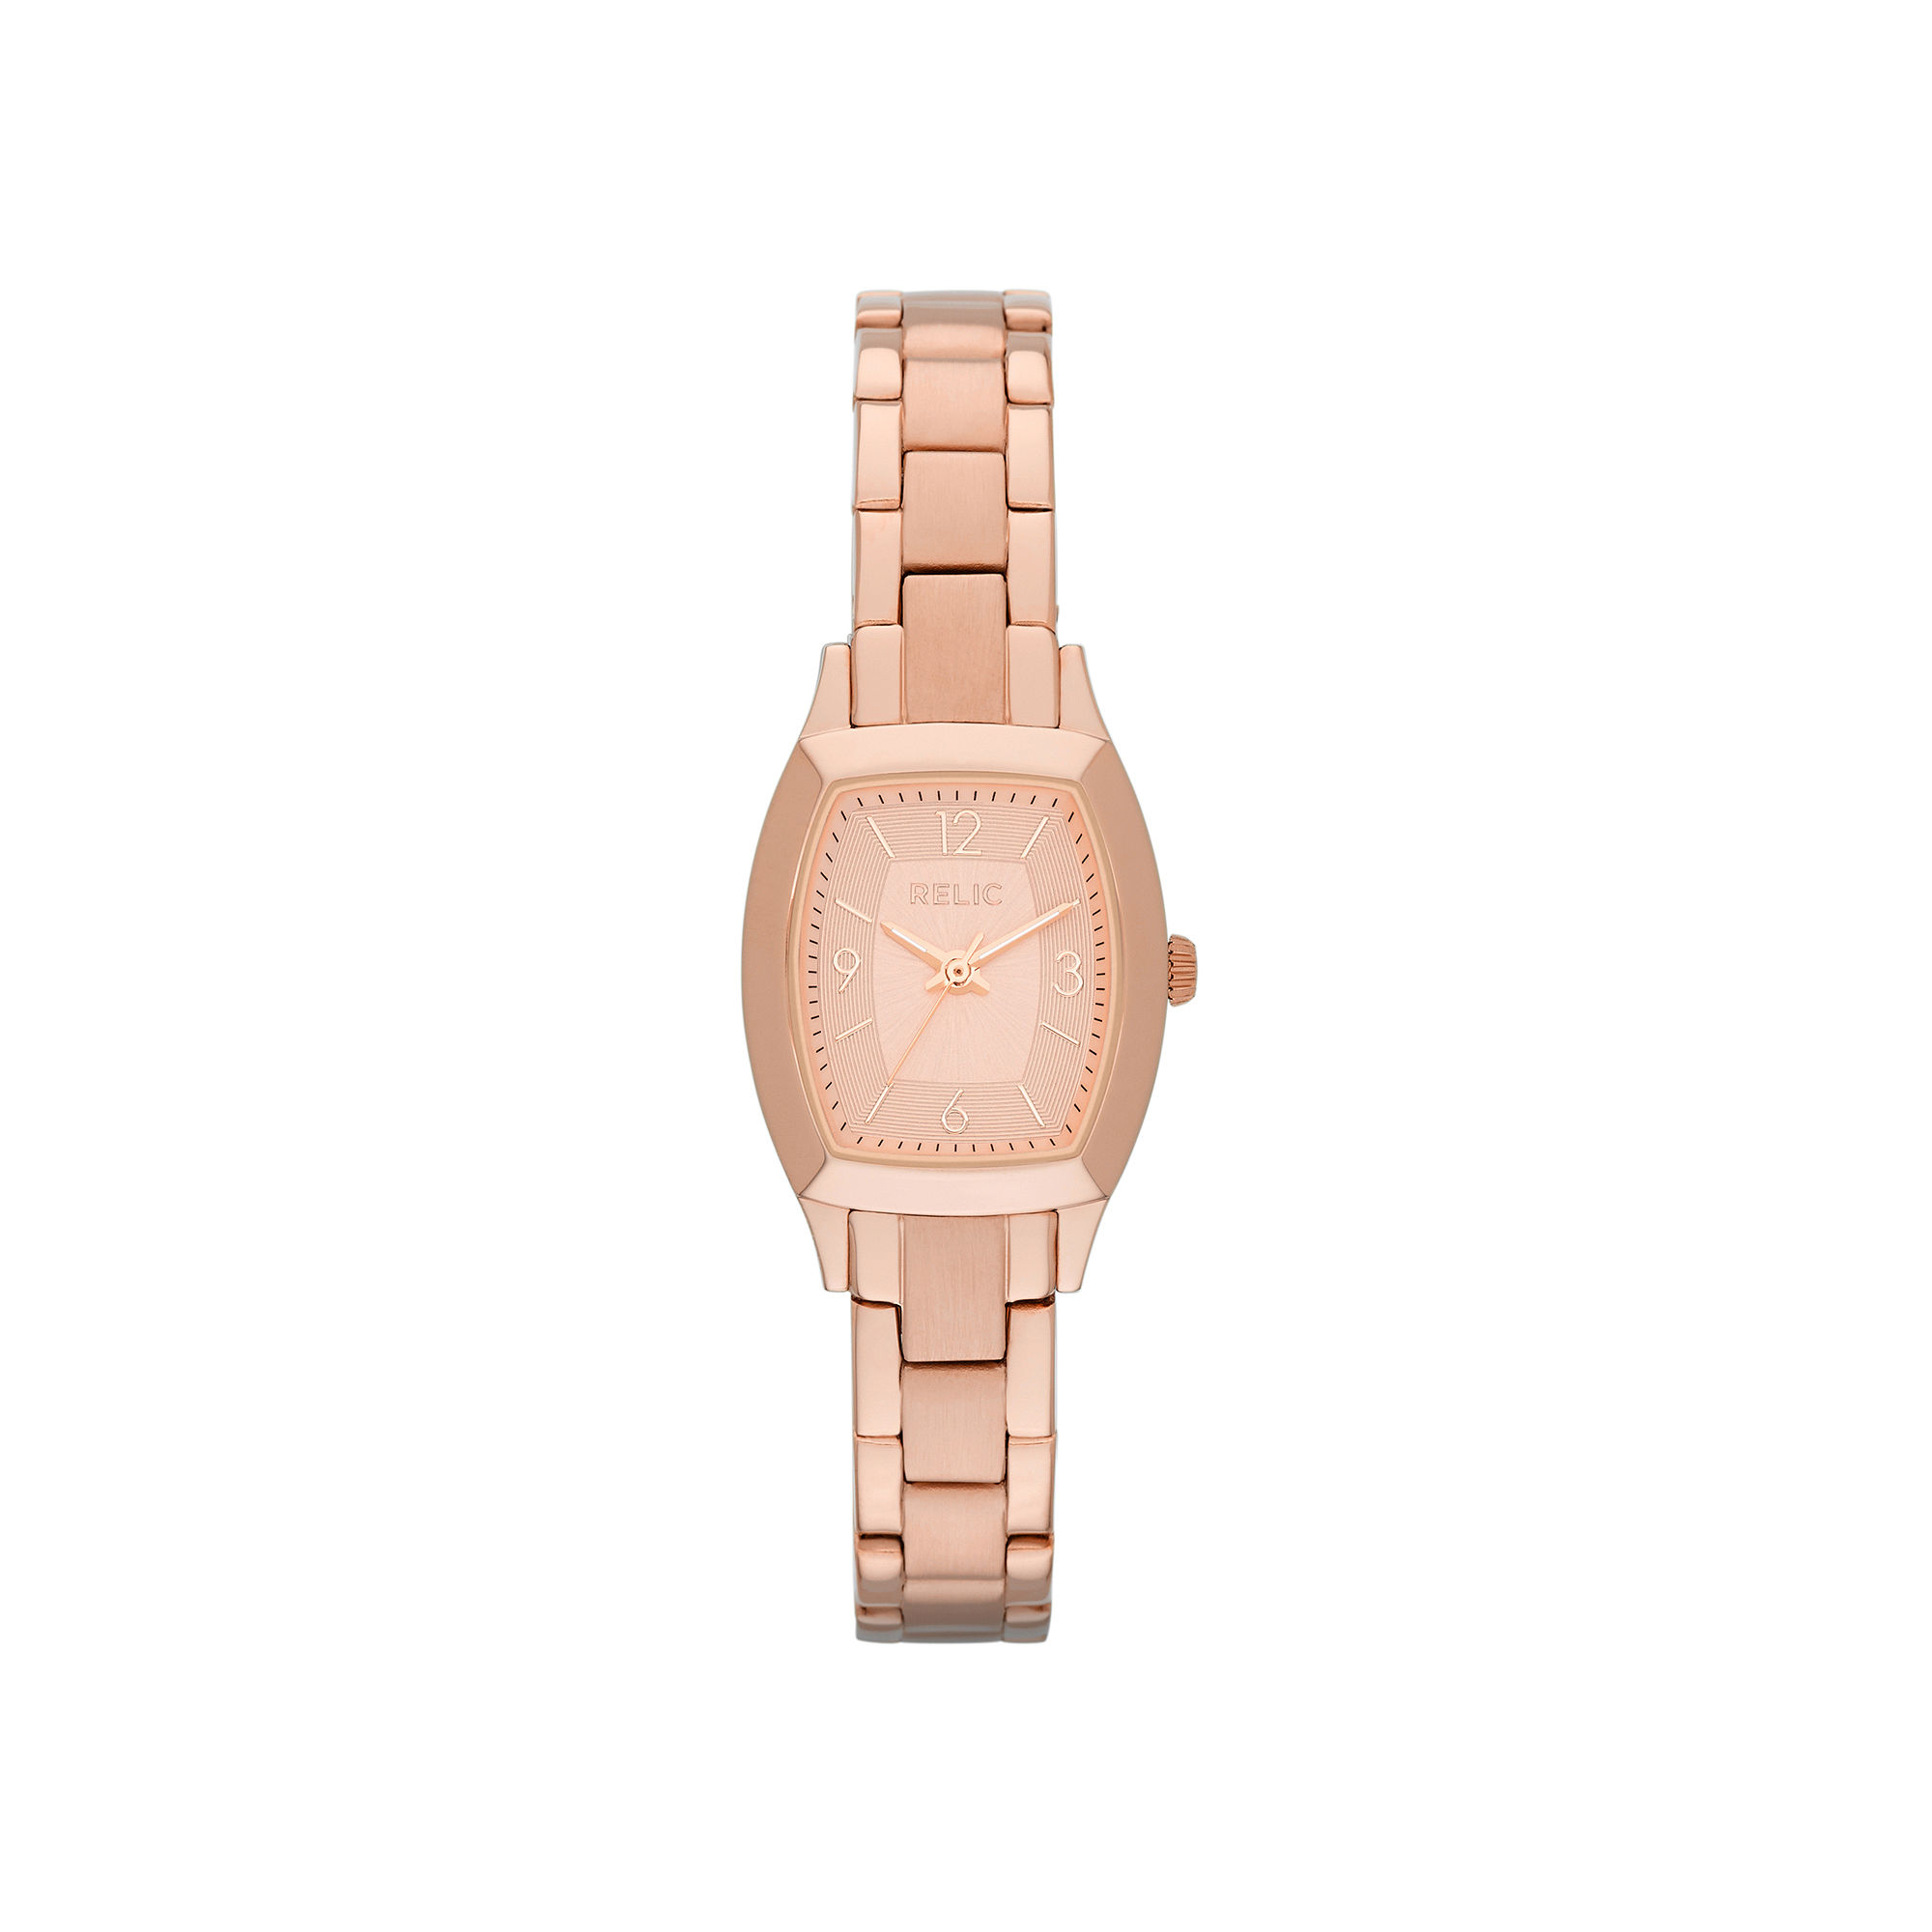 UPC 723765314556 product image for Relic Everly Womens Rose-Tone Watch | upcitemdb.com